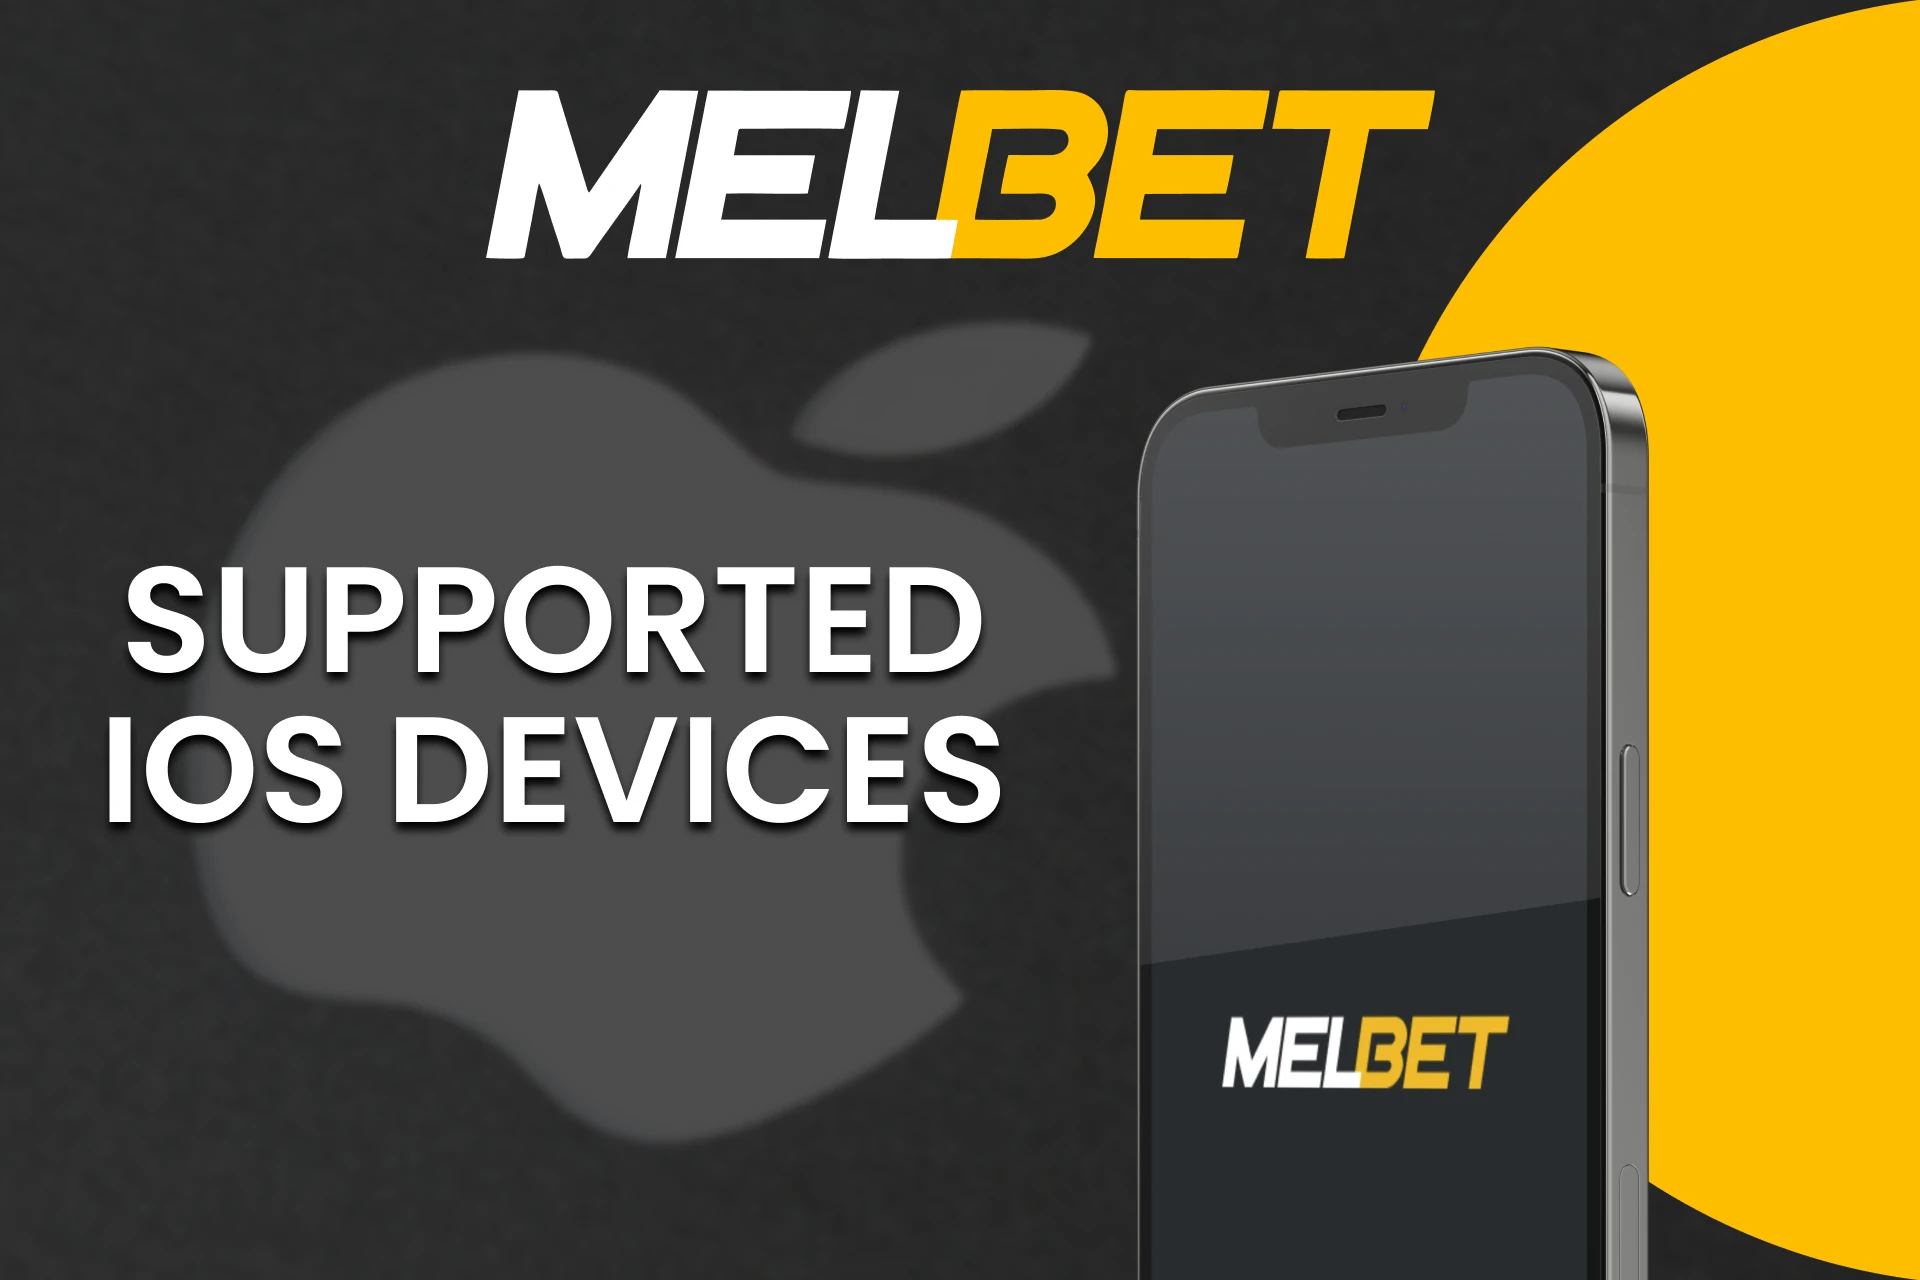 Melbet app supports all iOS devices.